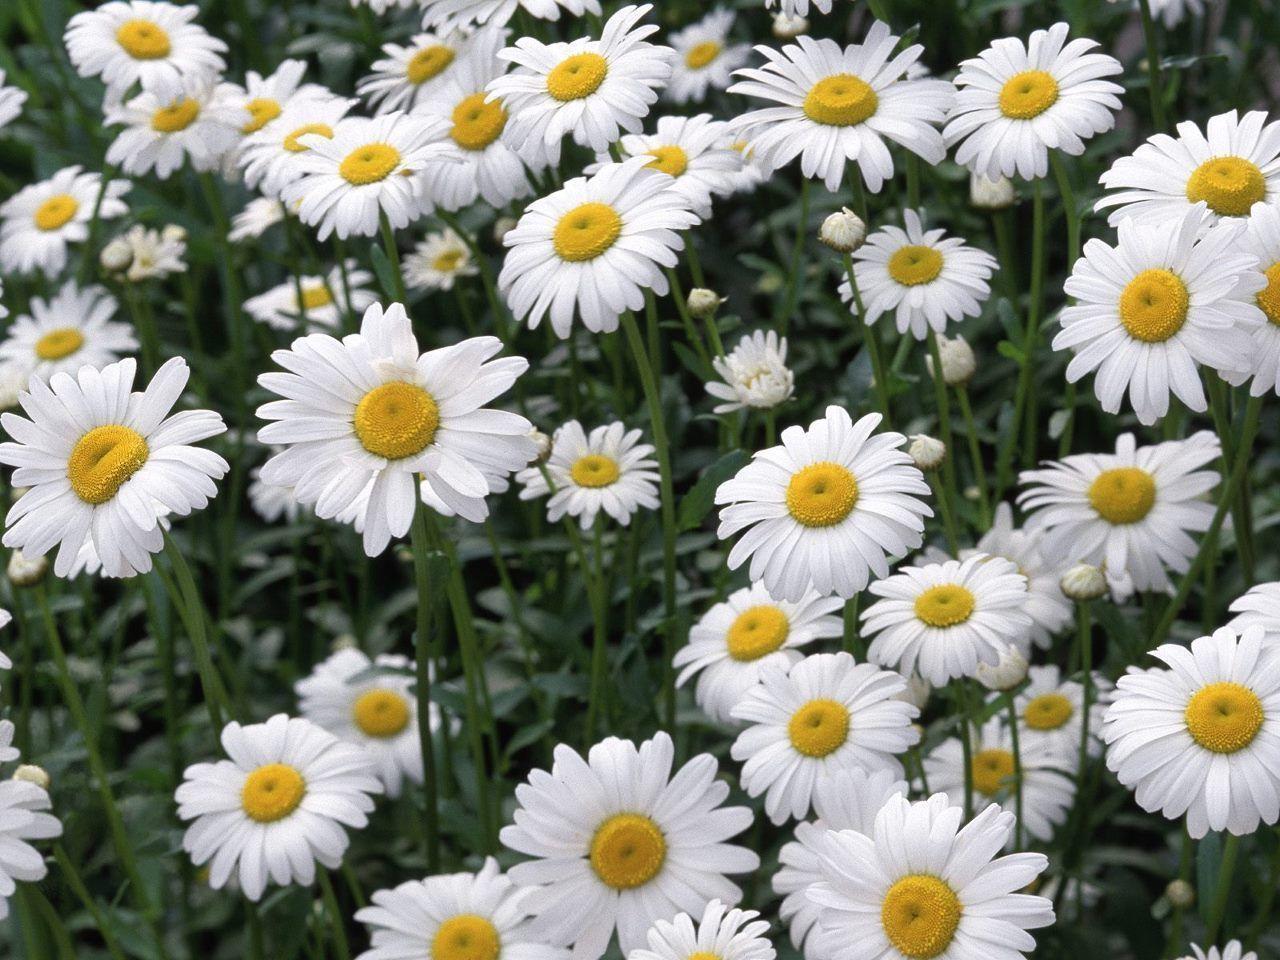 Wallpapers For > Daisy Wallpapers Tumblr